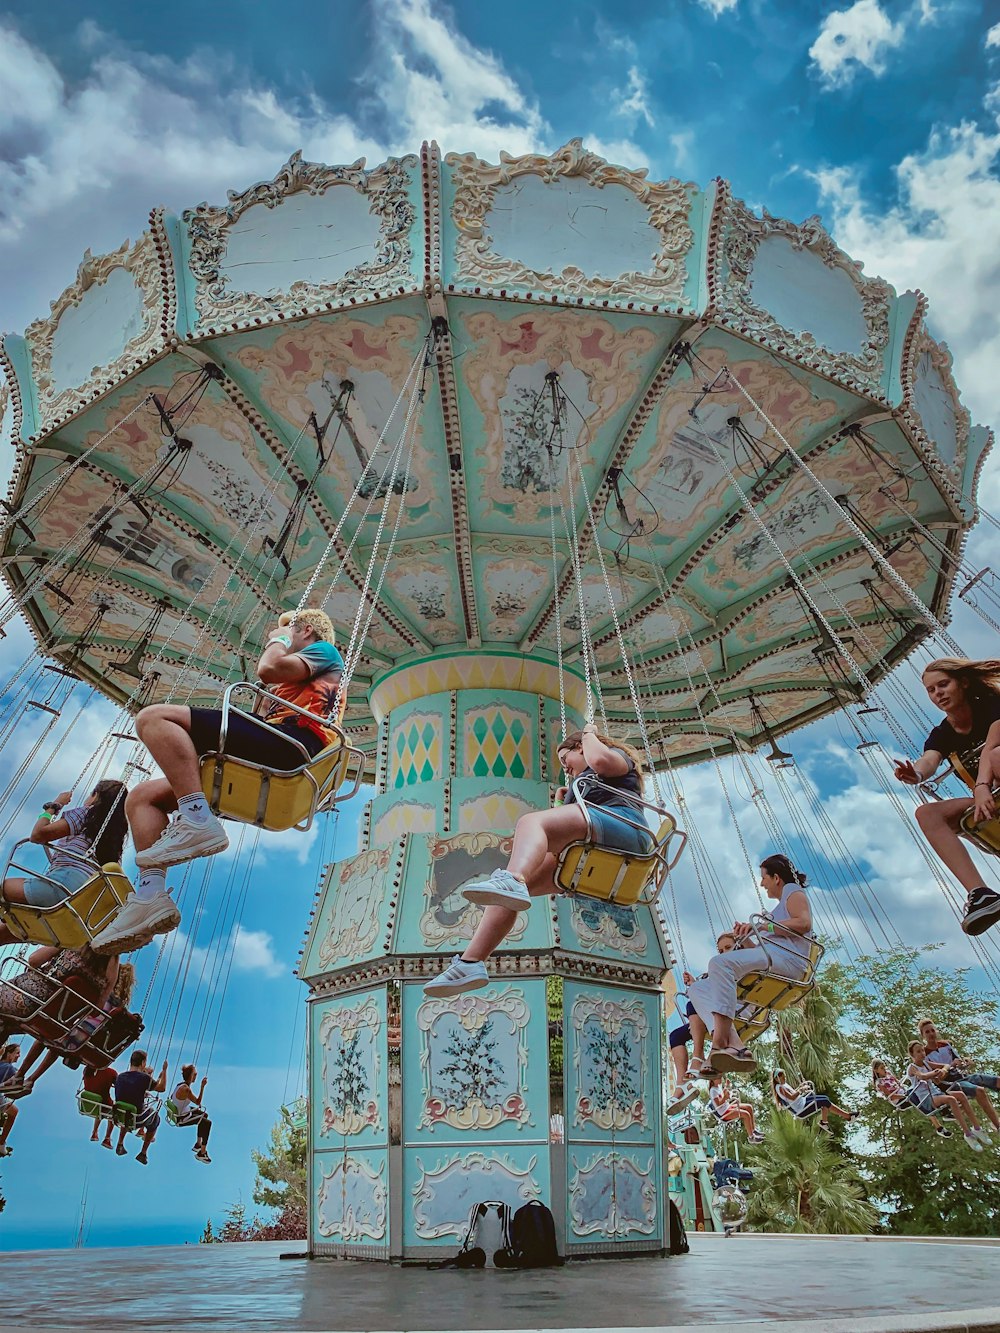 people riding on merry-go-round during daytime